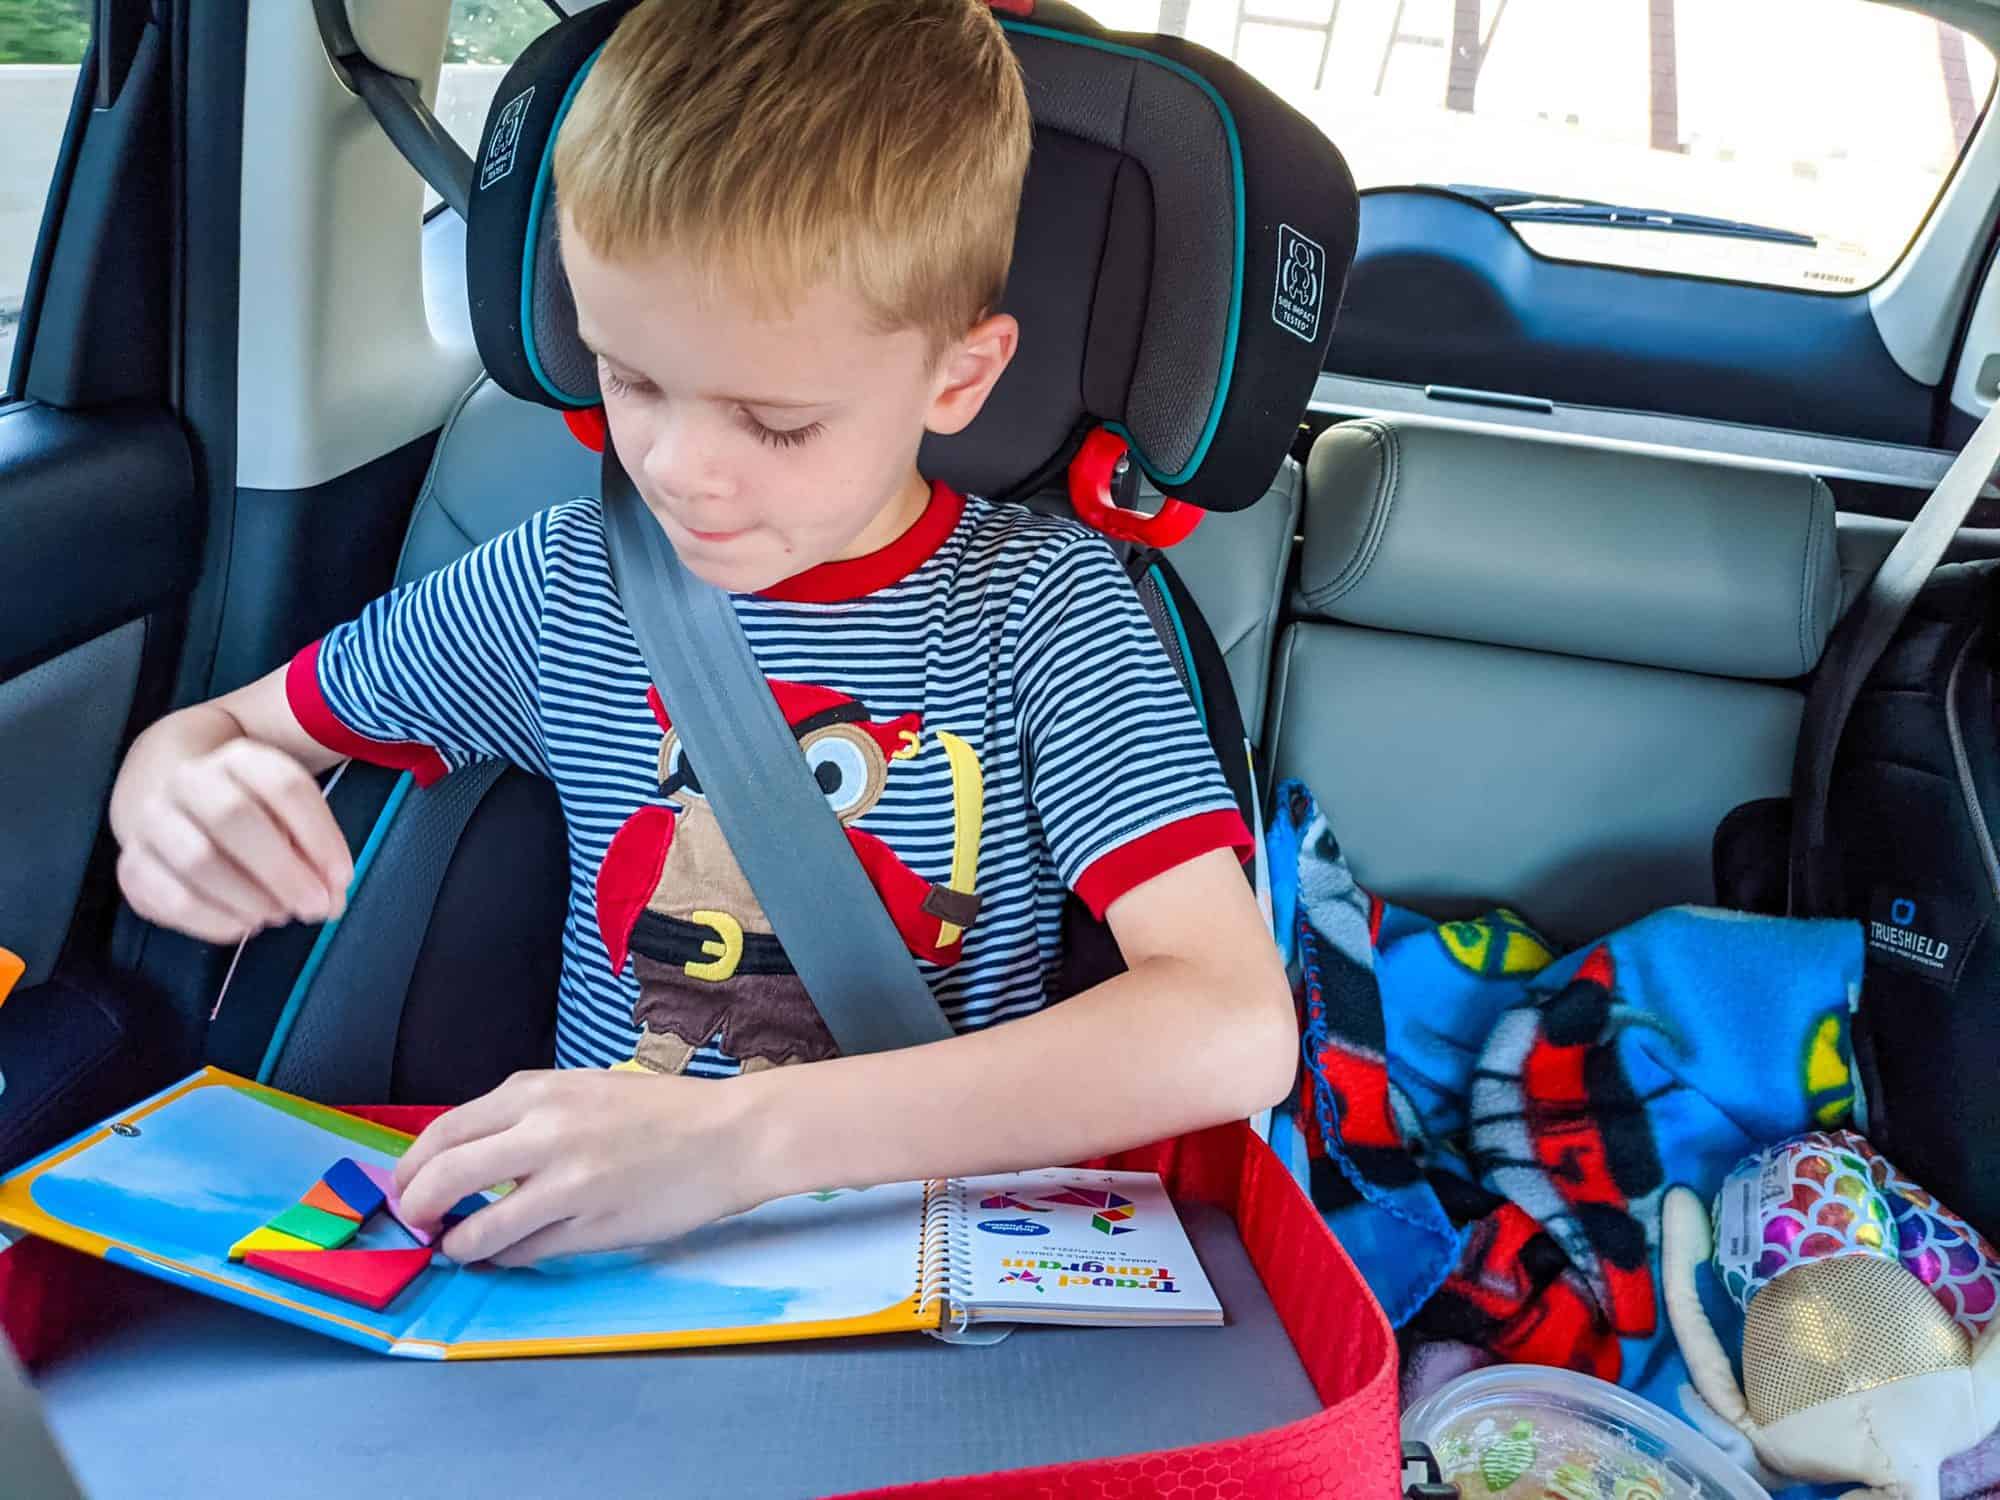 Screen free road trip ideas with kids travel trays, keep kids occupied in the car, must haves when traveling with kids